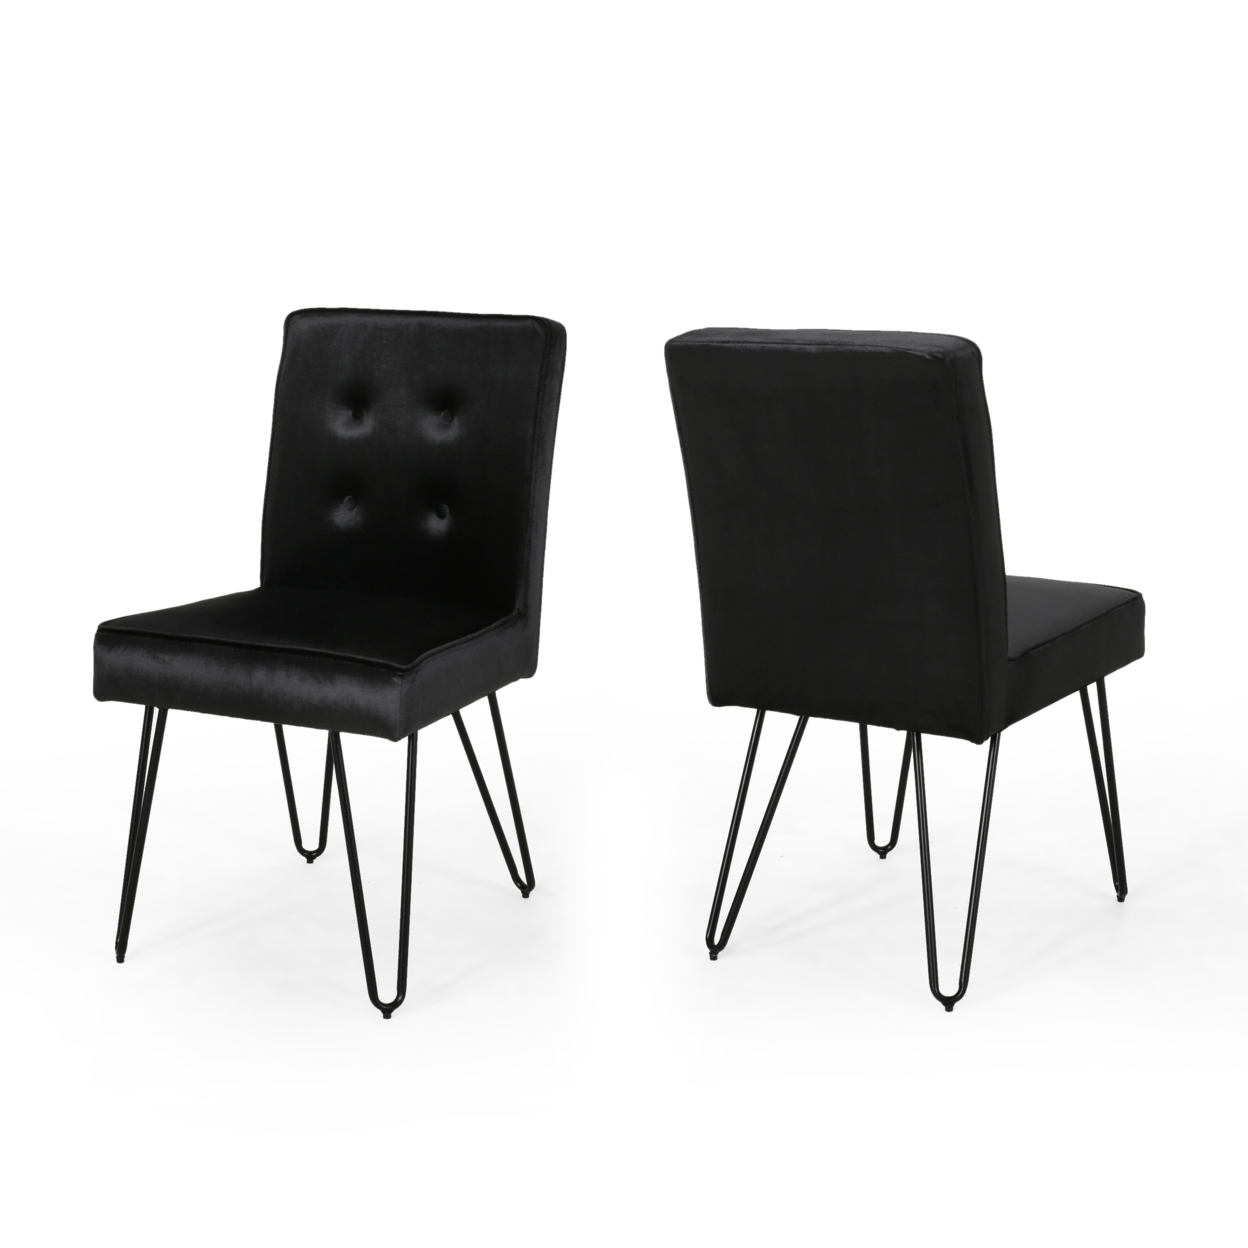 Natalie Glam Tufted Velvet Dining Chairs With Iron Legs (Set Of 2) - Black + Black